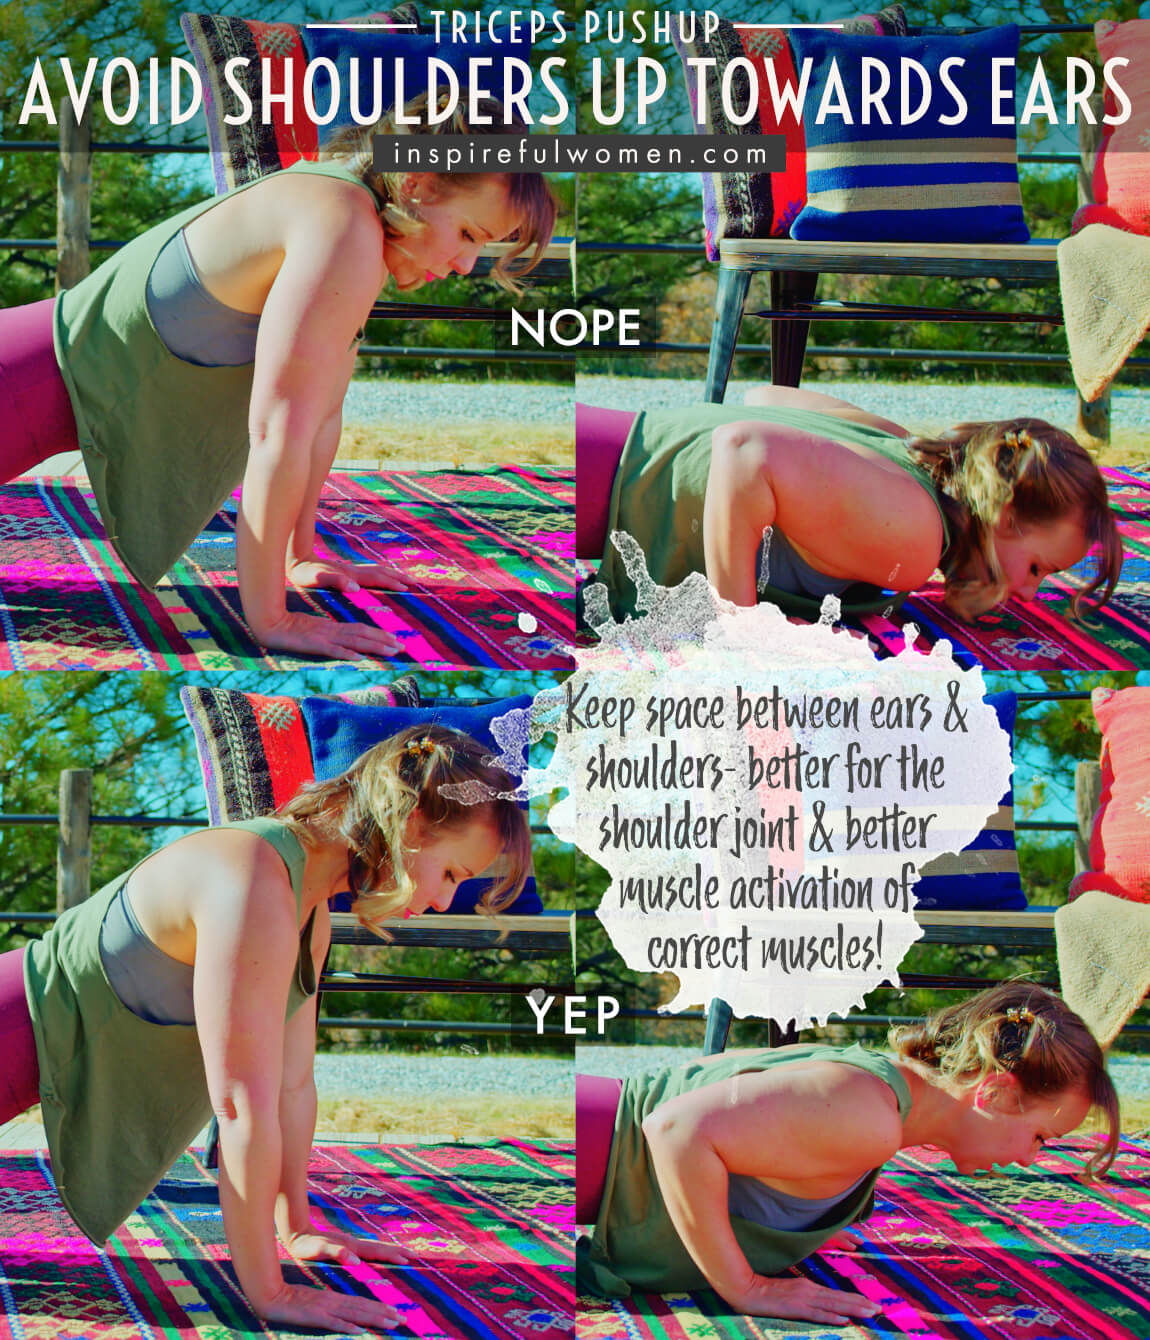 avoid-shoulders-up-towards-ears-triceps-push-ups-arm-exercise-common-mistakes